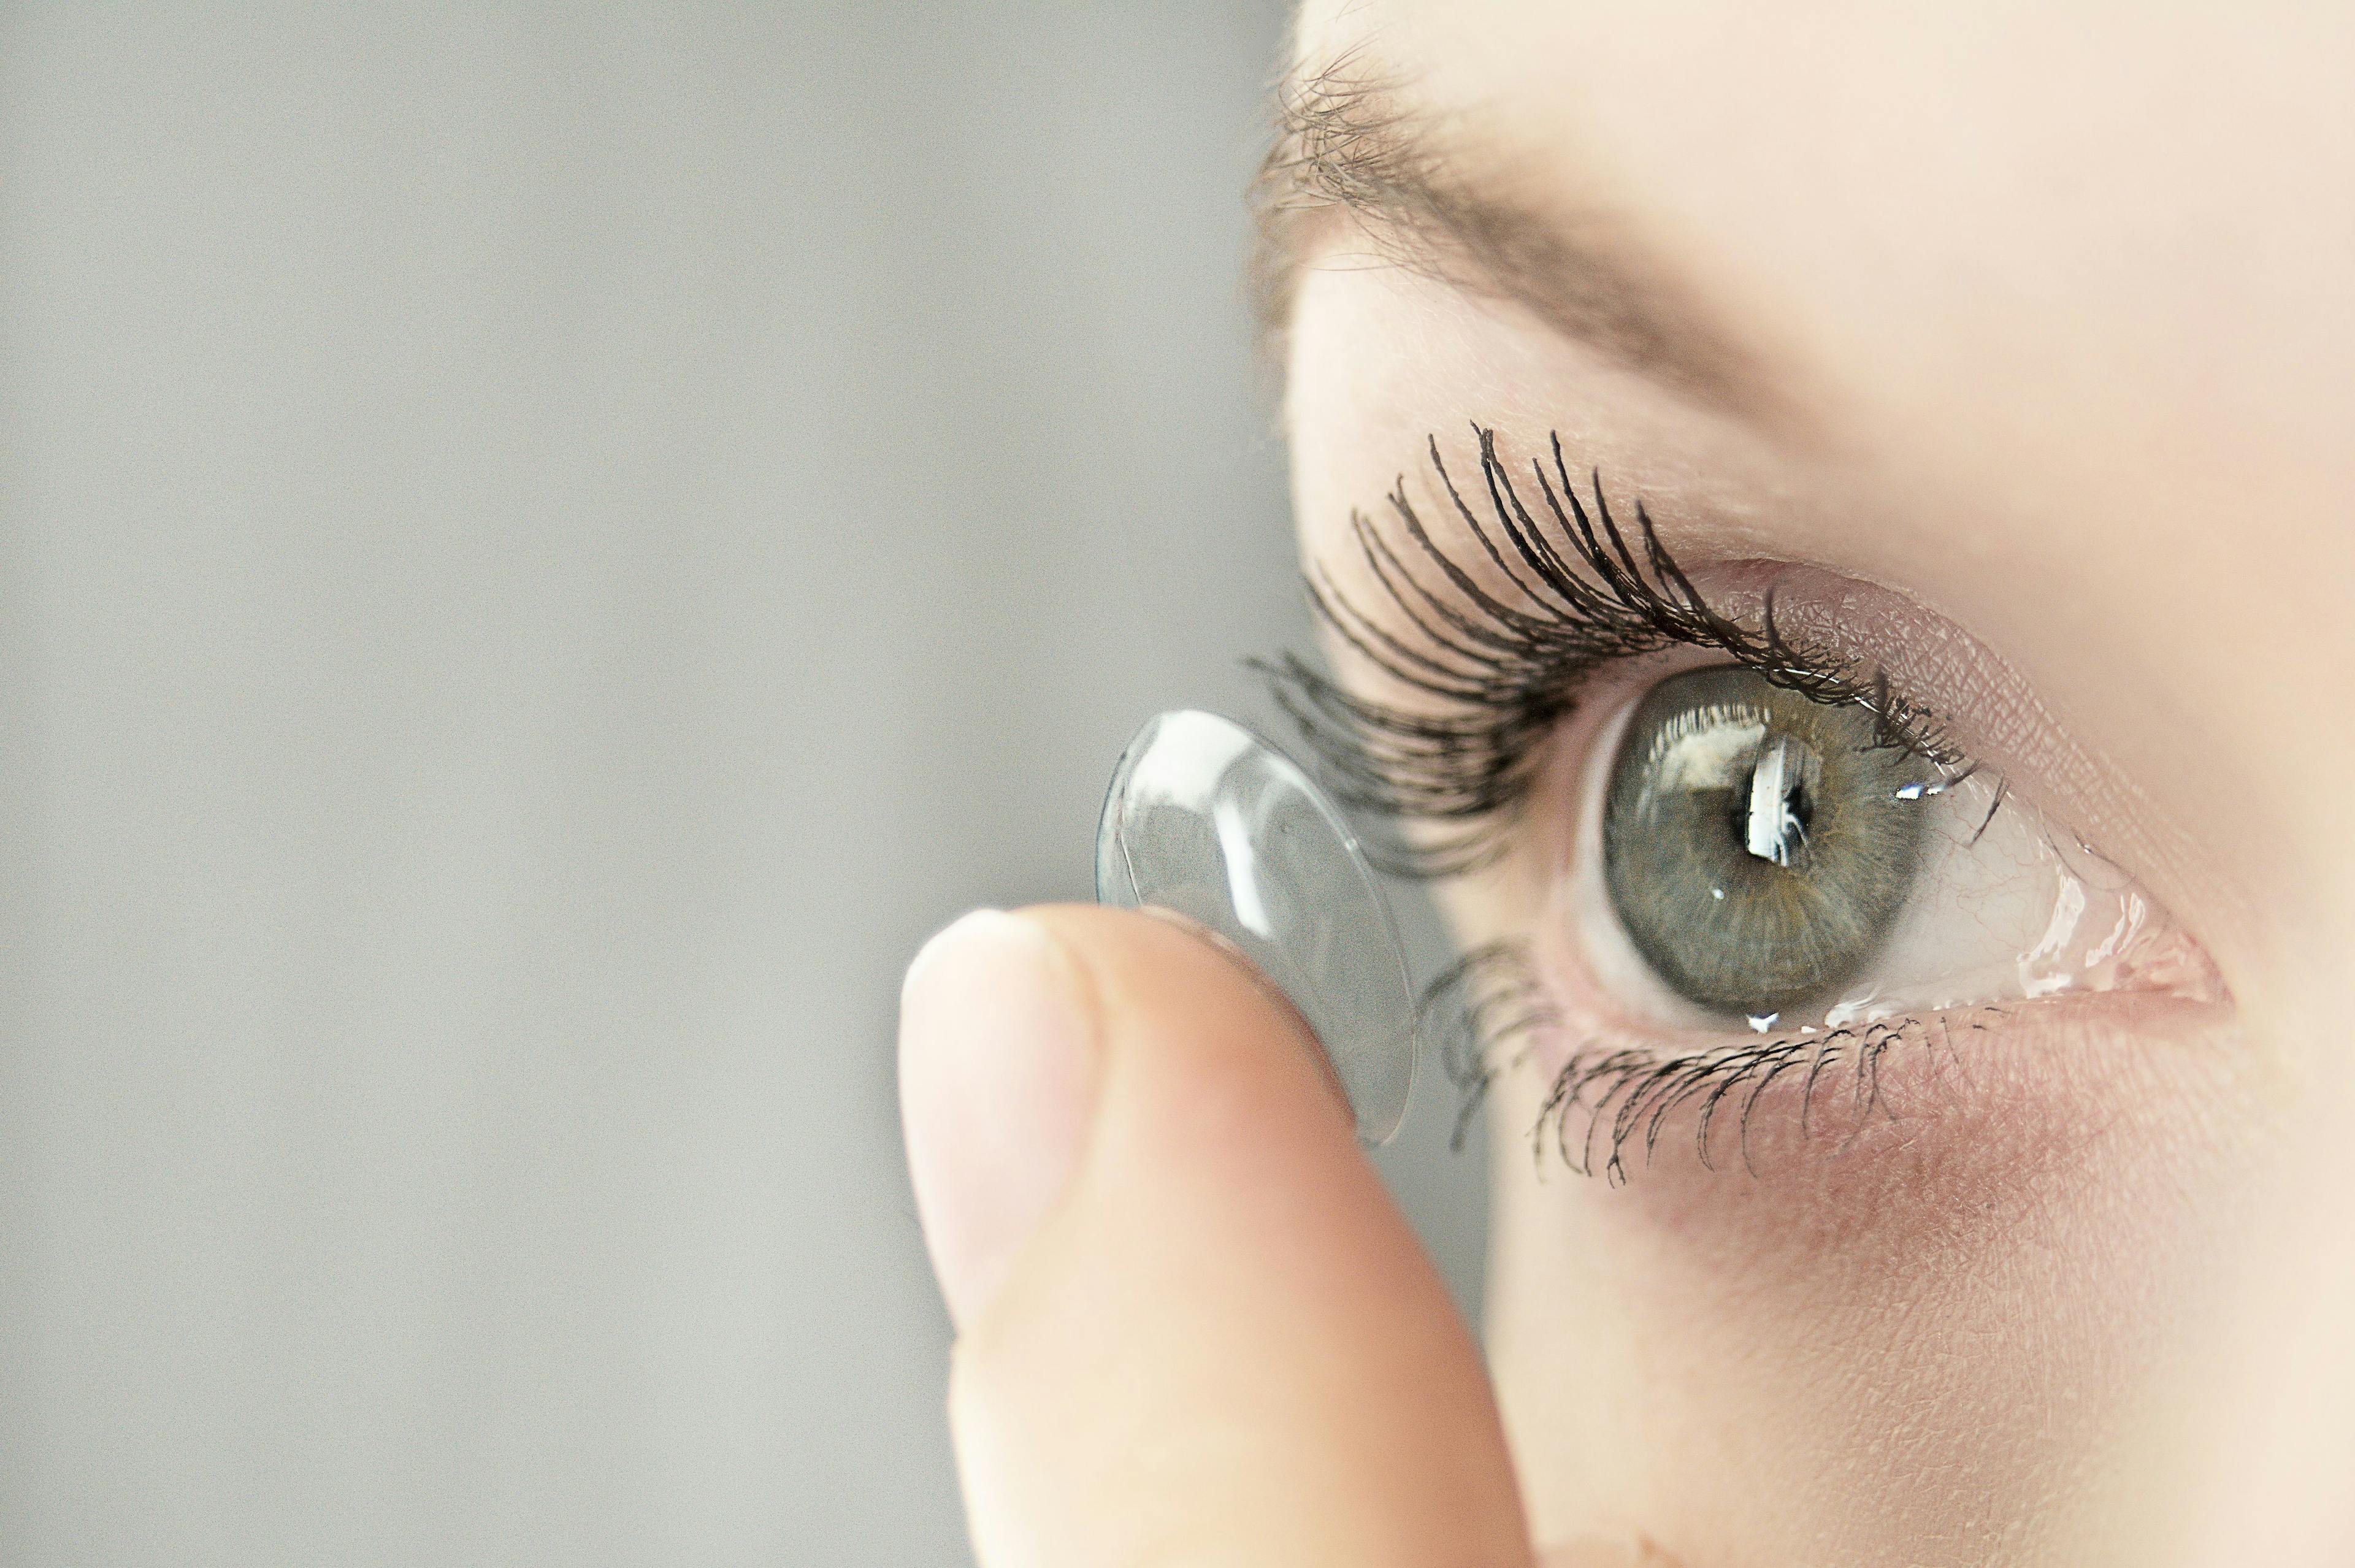 Woman loses eye after showering while wearing contact lenses and contracting parasite